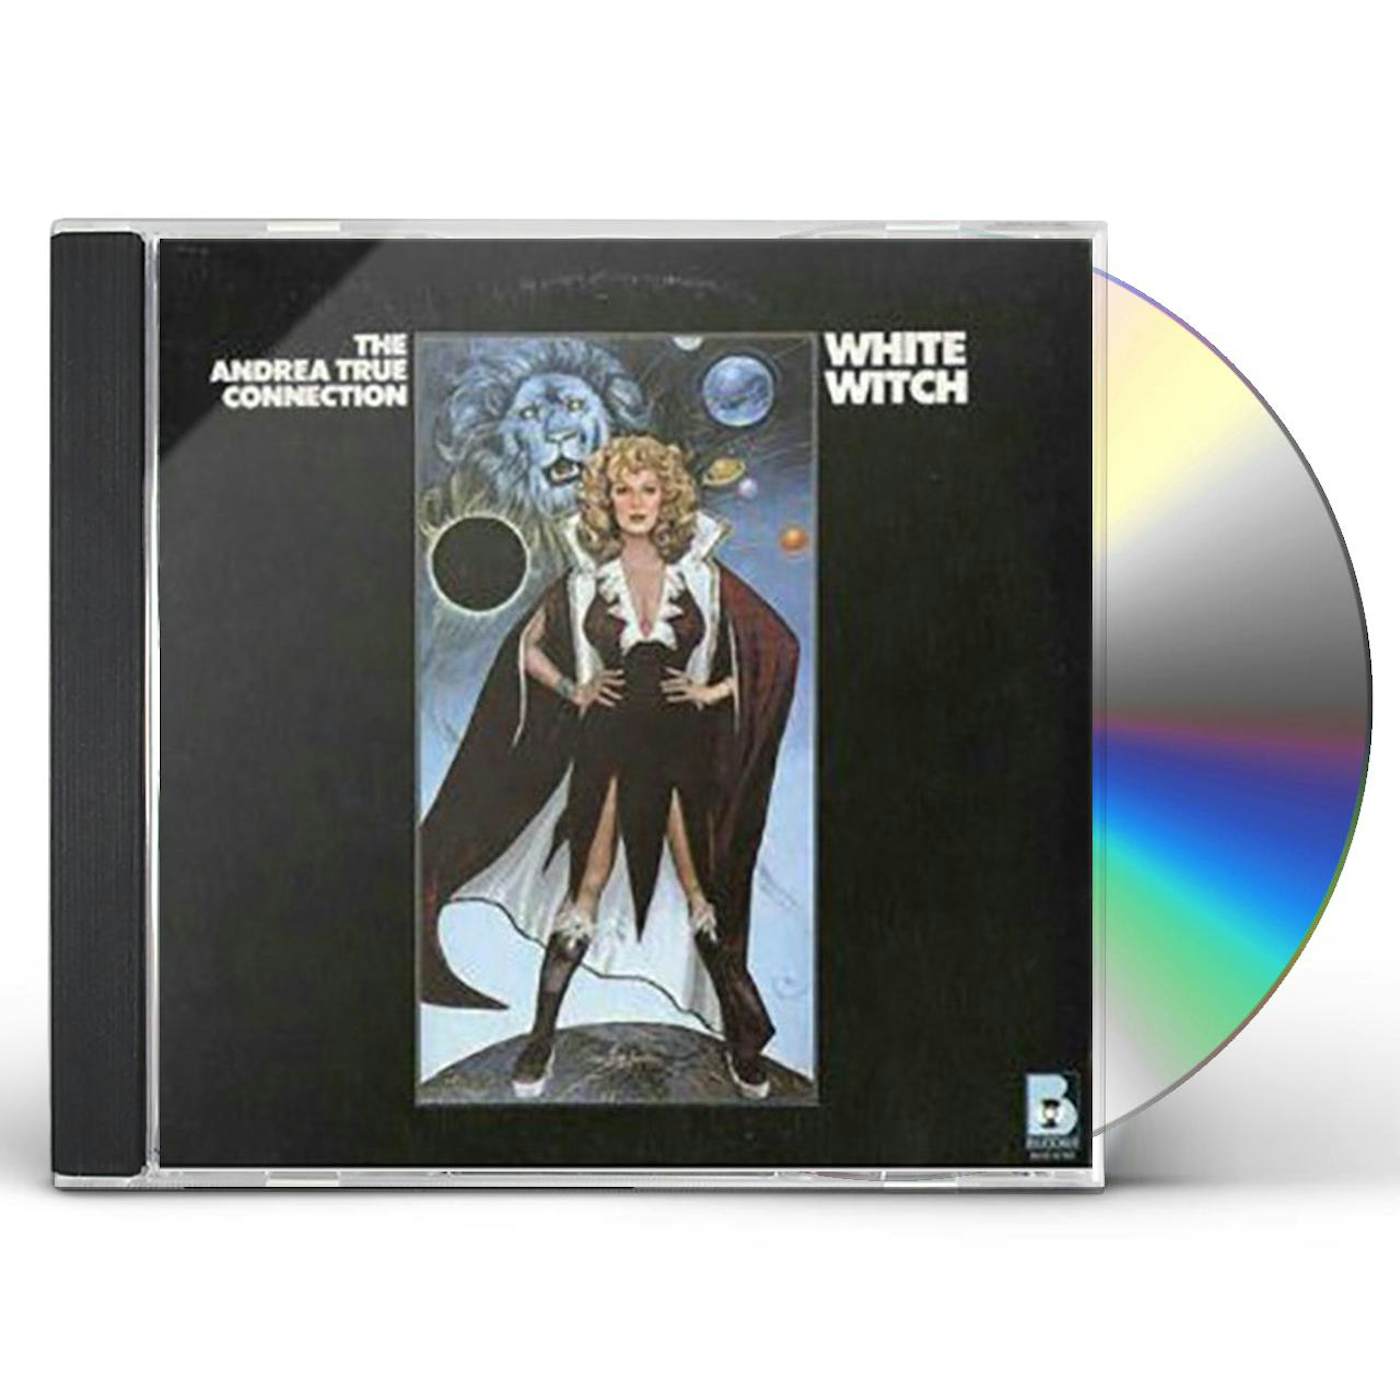 Andrea True Connection WHITE WITCH CD